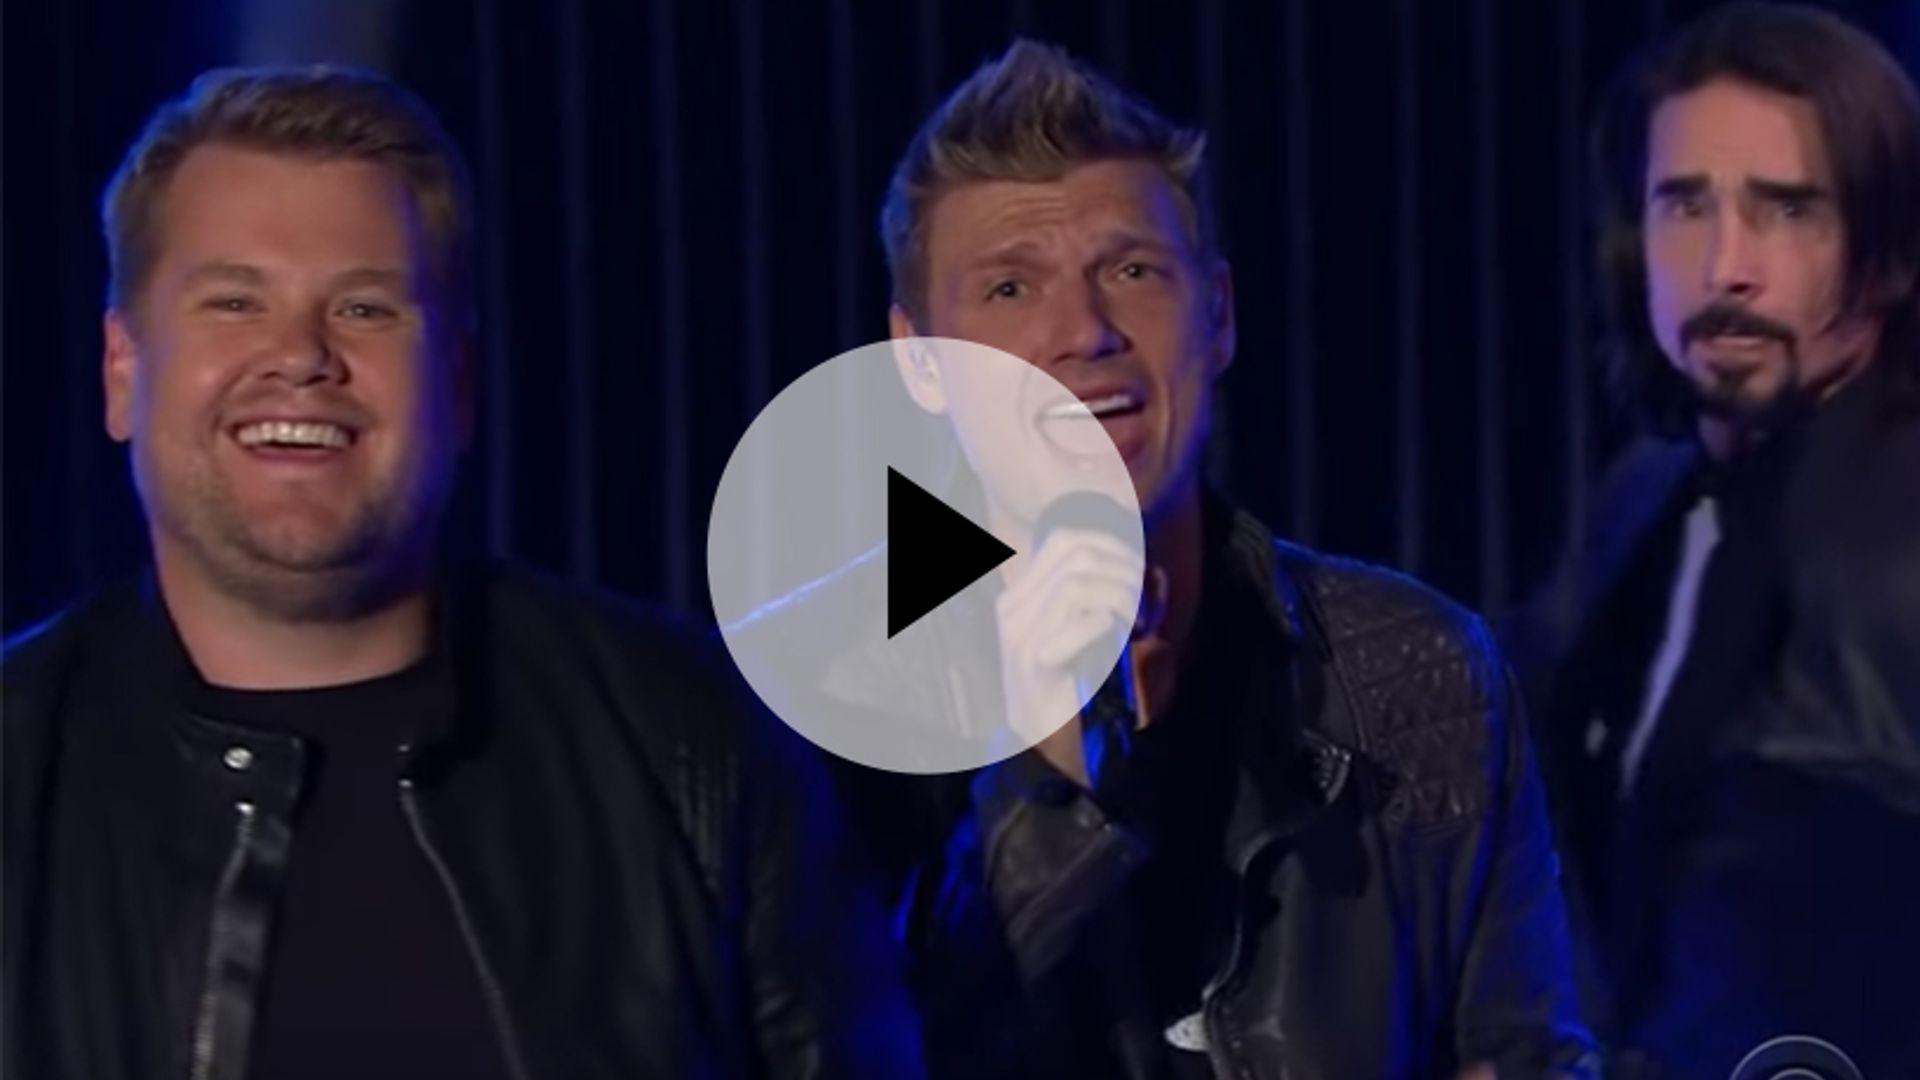 James Corden performs with the Backstreet Boys: watch!